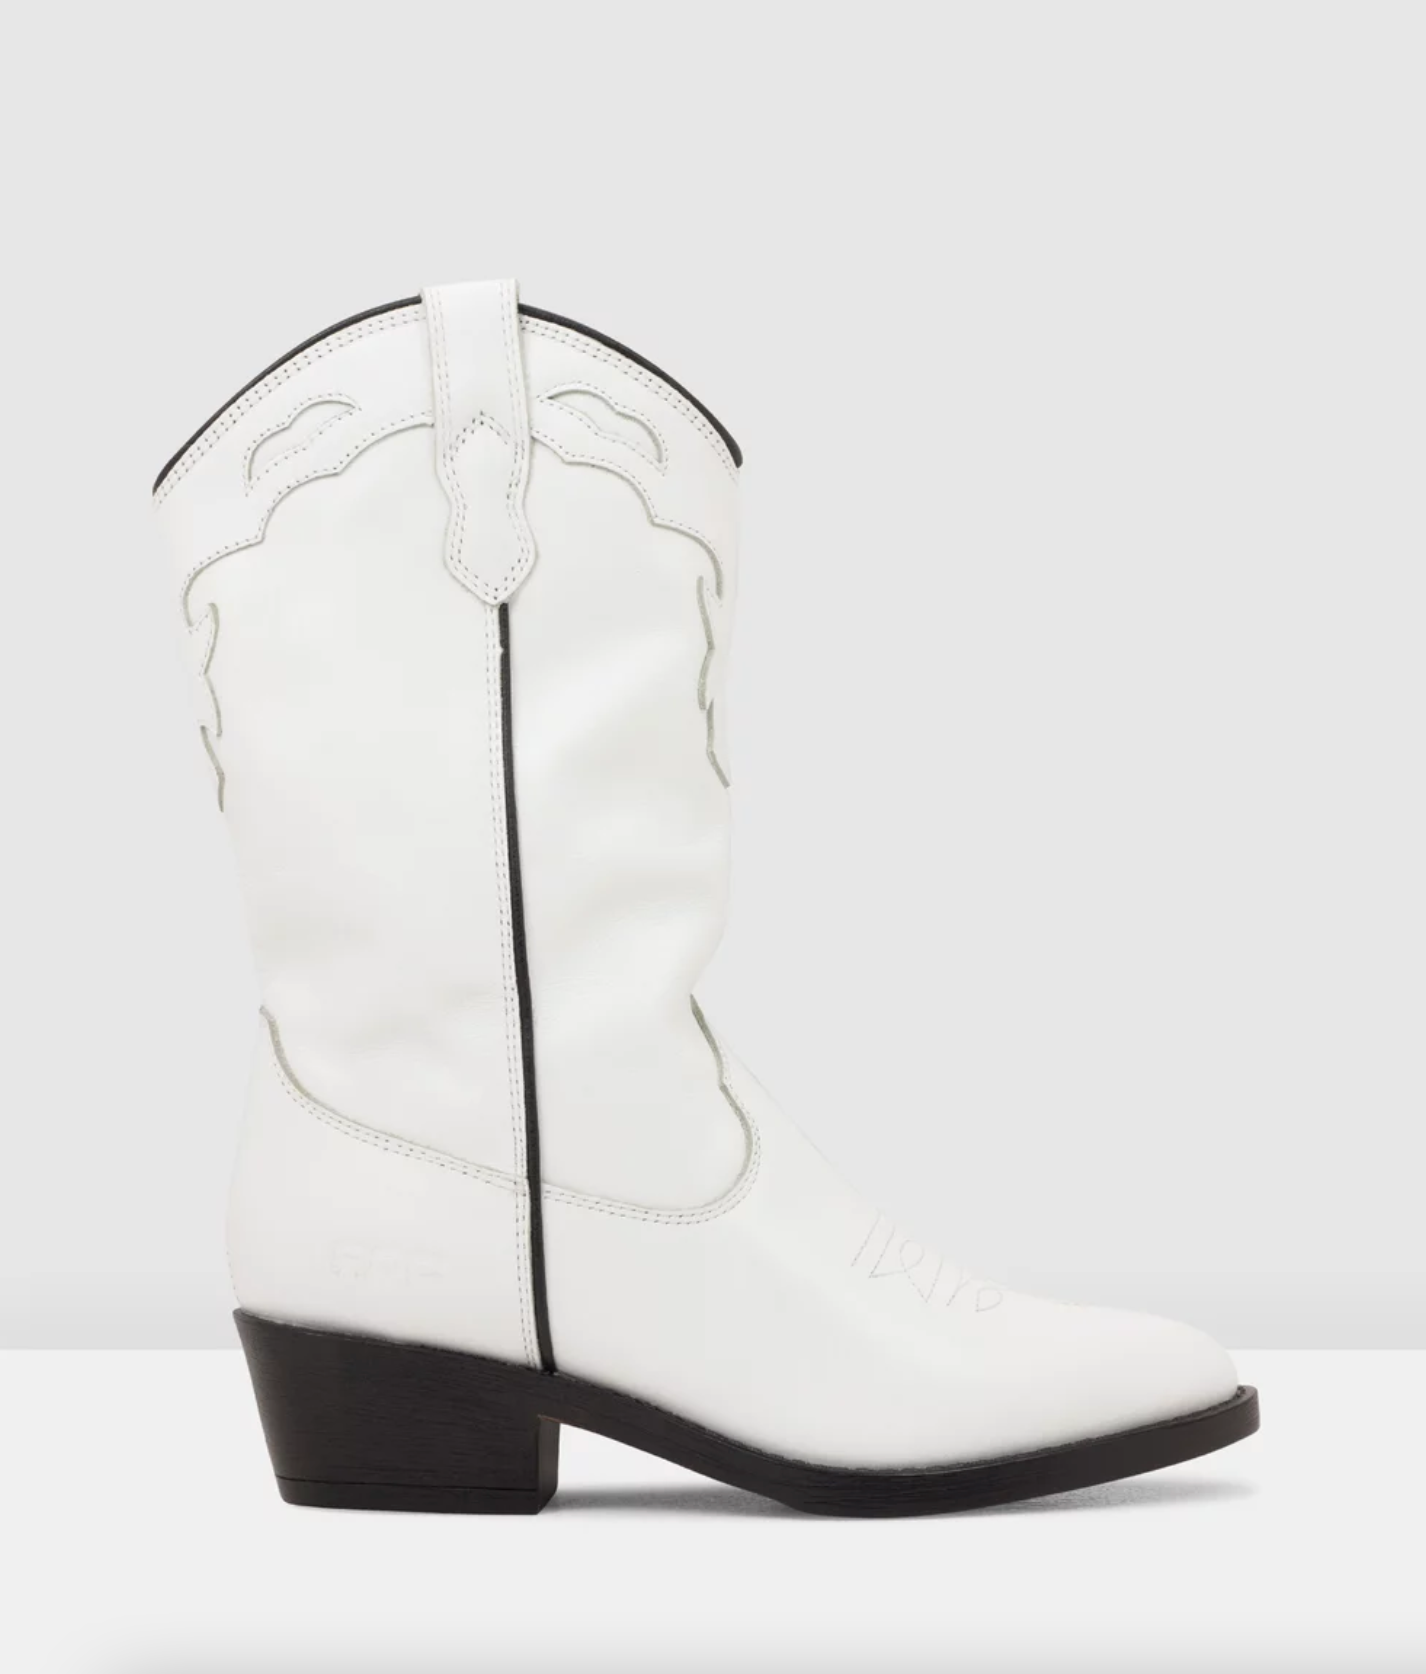 Women's White Boots  Buy White Boots Online Australia - THE ICONIC